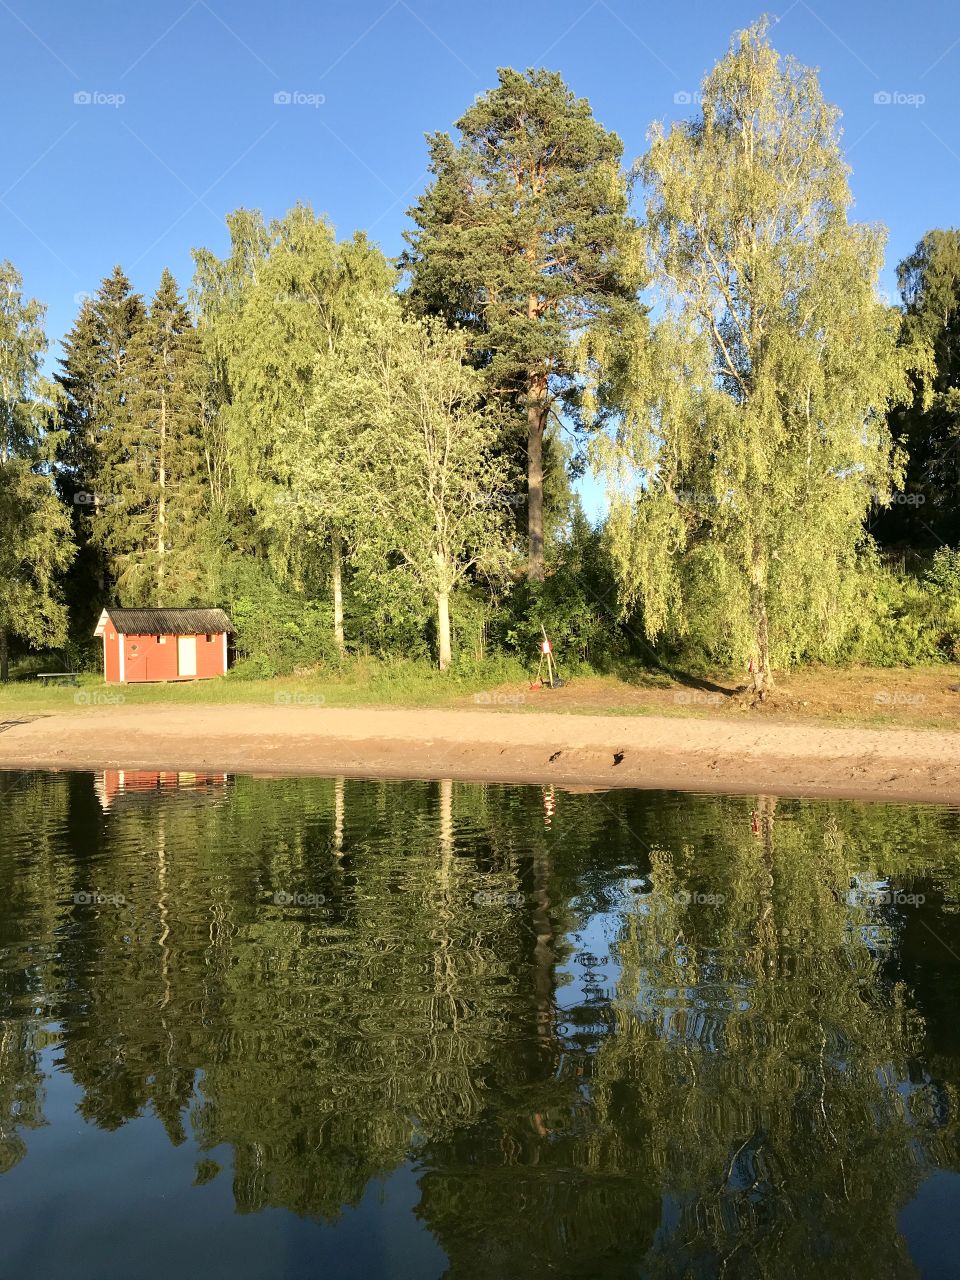 Lake side view with trees and a cottage